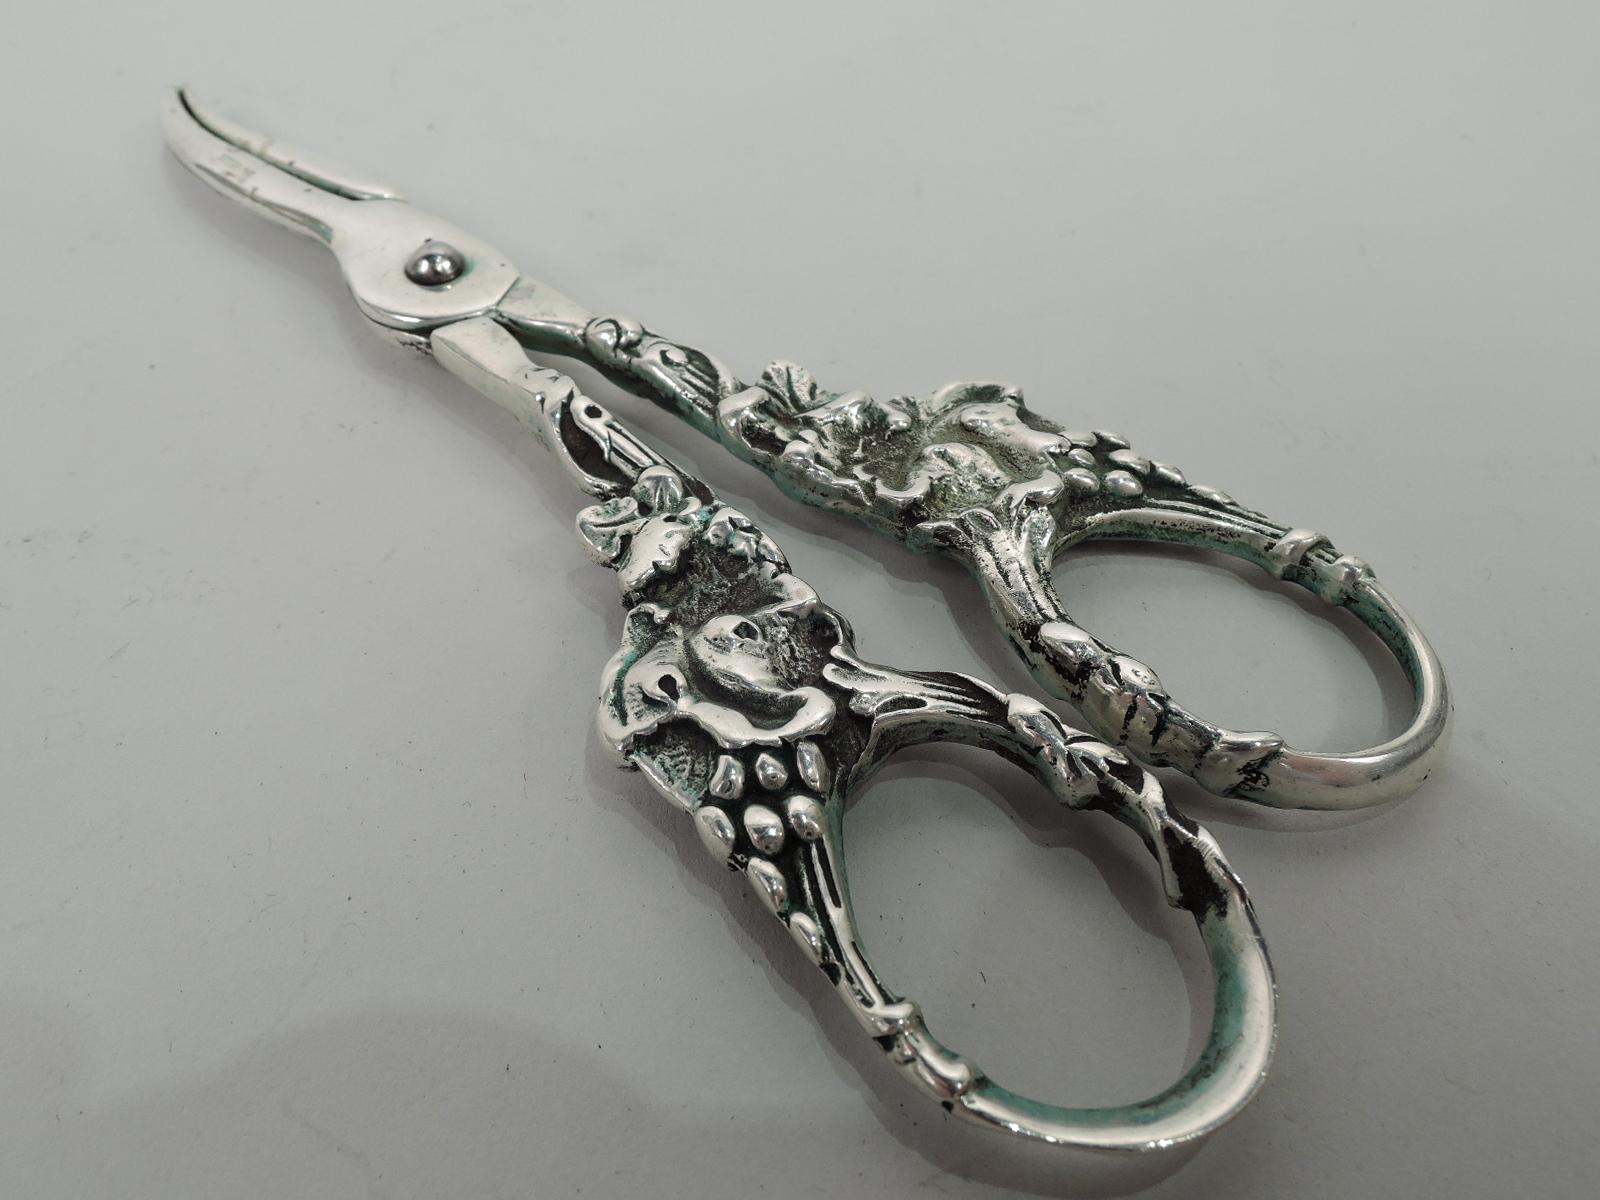 American Edwardian sterling silver grape shears, ca 1910. Ring handles in form of fruiting grapevine. Marked “Sterling”. Weight: 3.3 troy ounces.